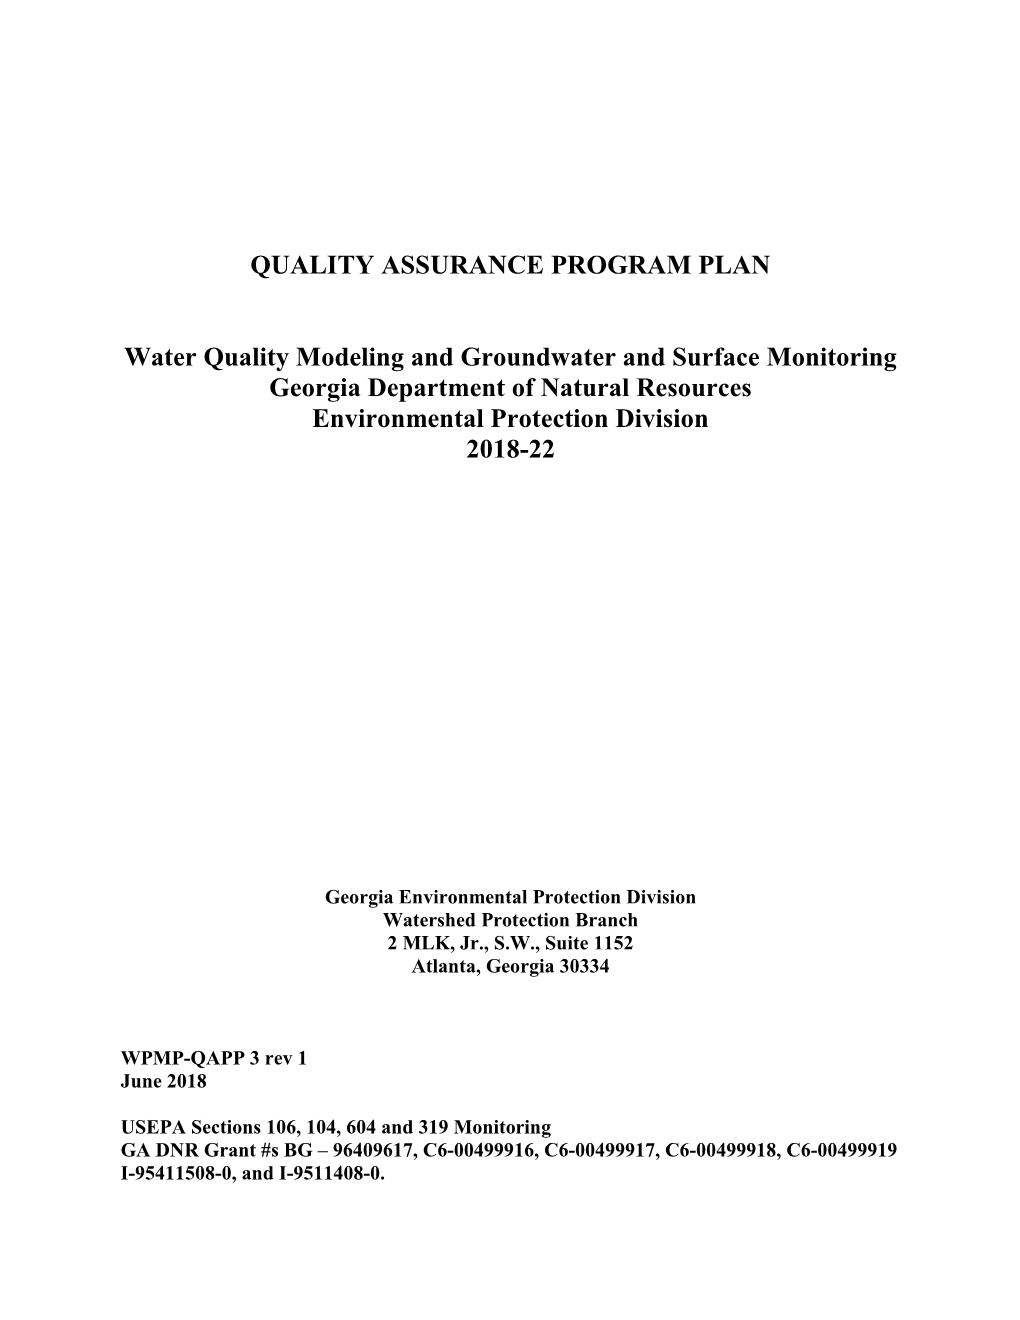 Ambient Monitoring Quality Assurance Project Plan